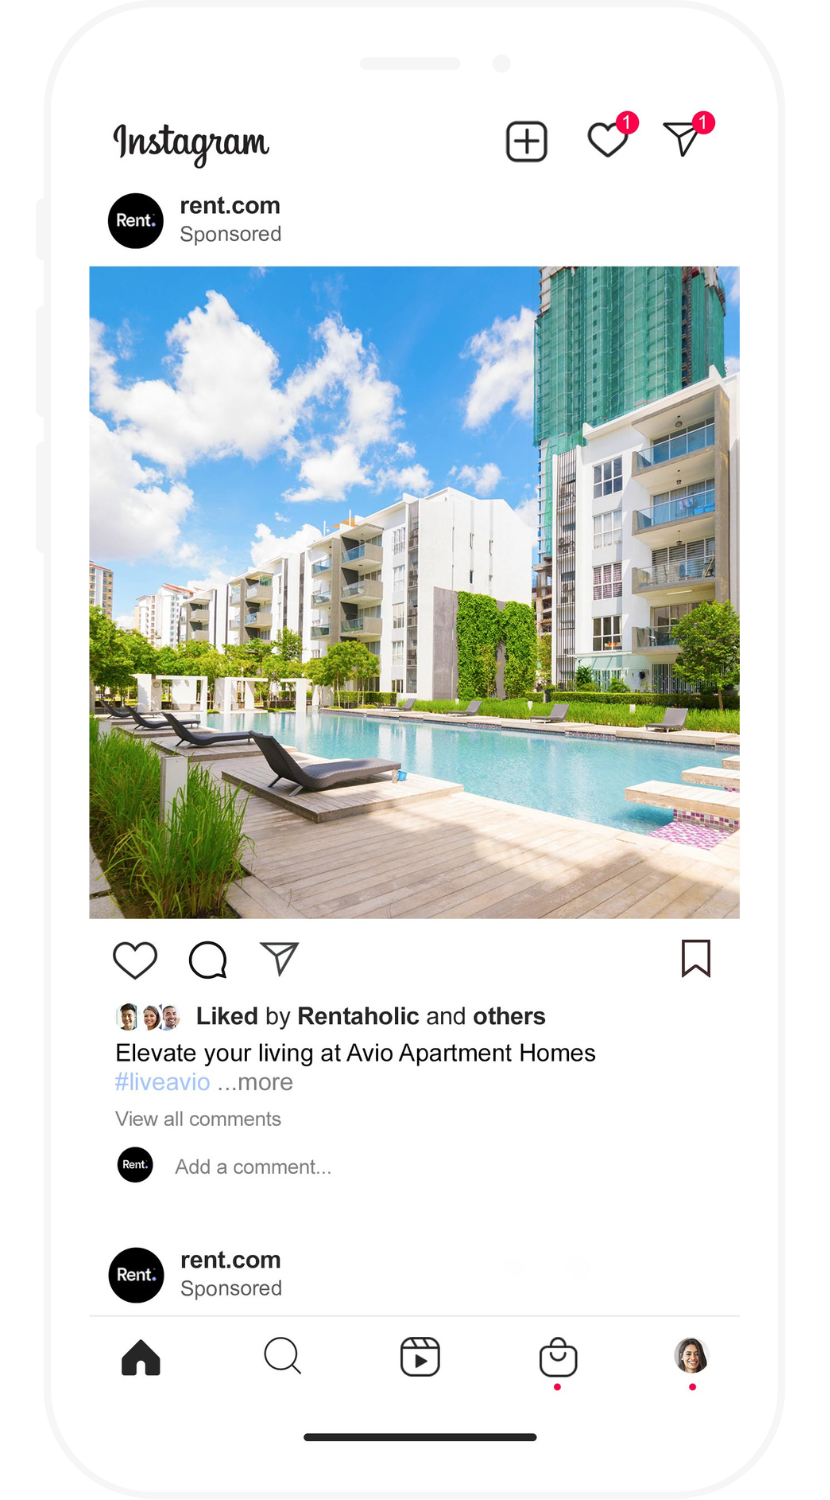 RentSocial Instagram ad on Mobile phone